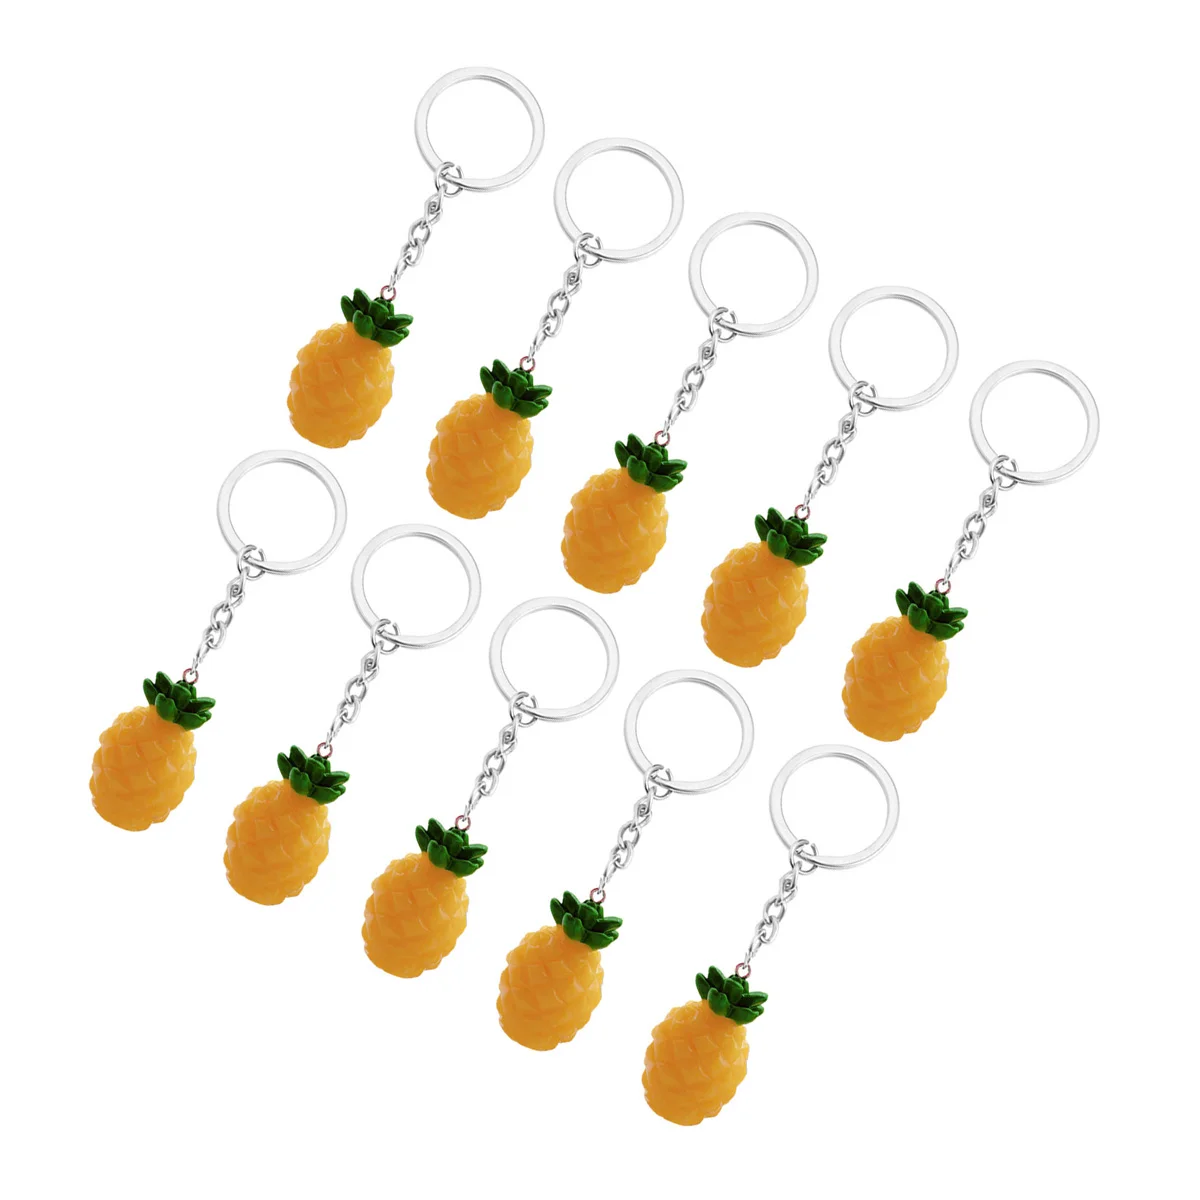 

10 Pcs Couples Keychains Pineapple Fruit Clasp Grab Bag Gifts Women Pendant Resin Crystal Keyring